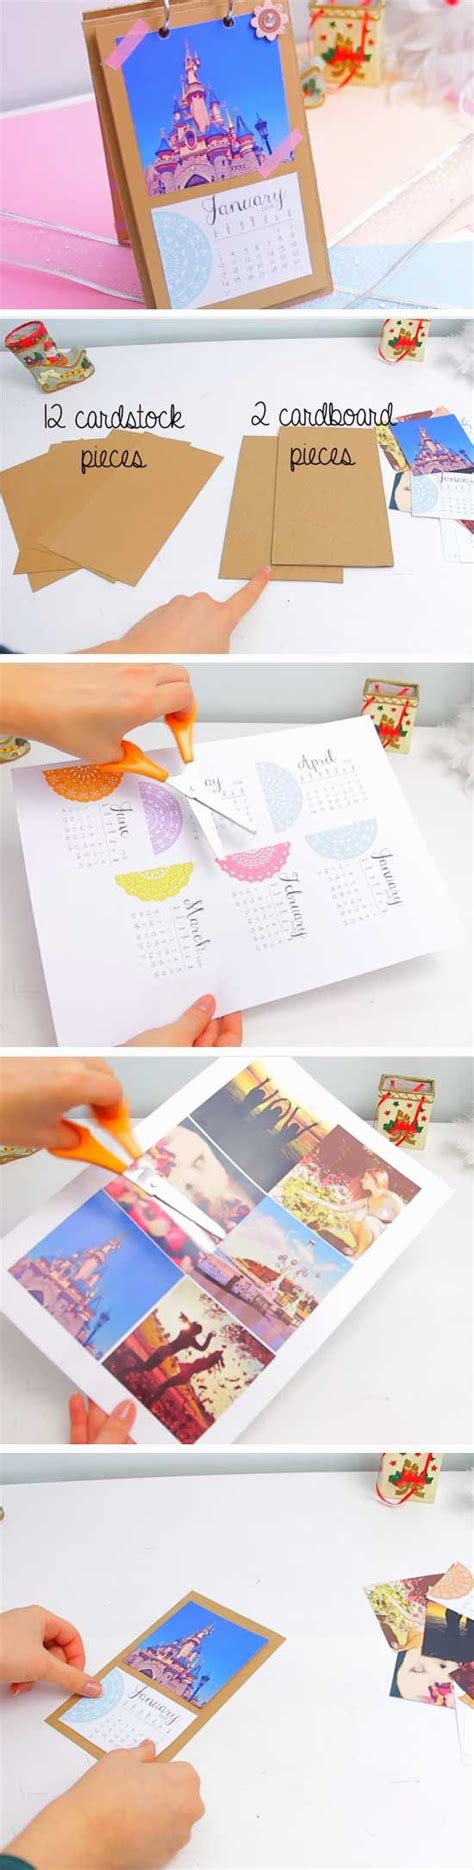 This christmas craft diy project can be accomplished by kids as well. Photo Calendar | Last Minute DIY Christmas Gifts for Mom ...